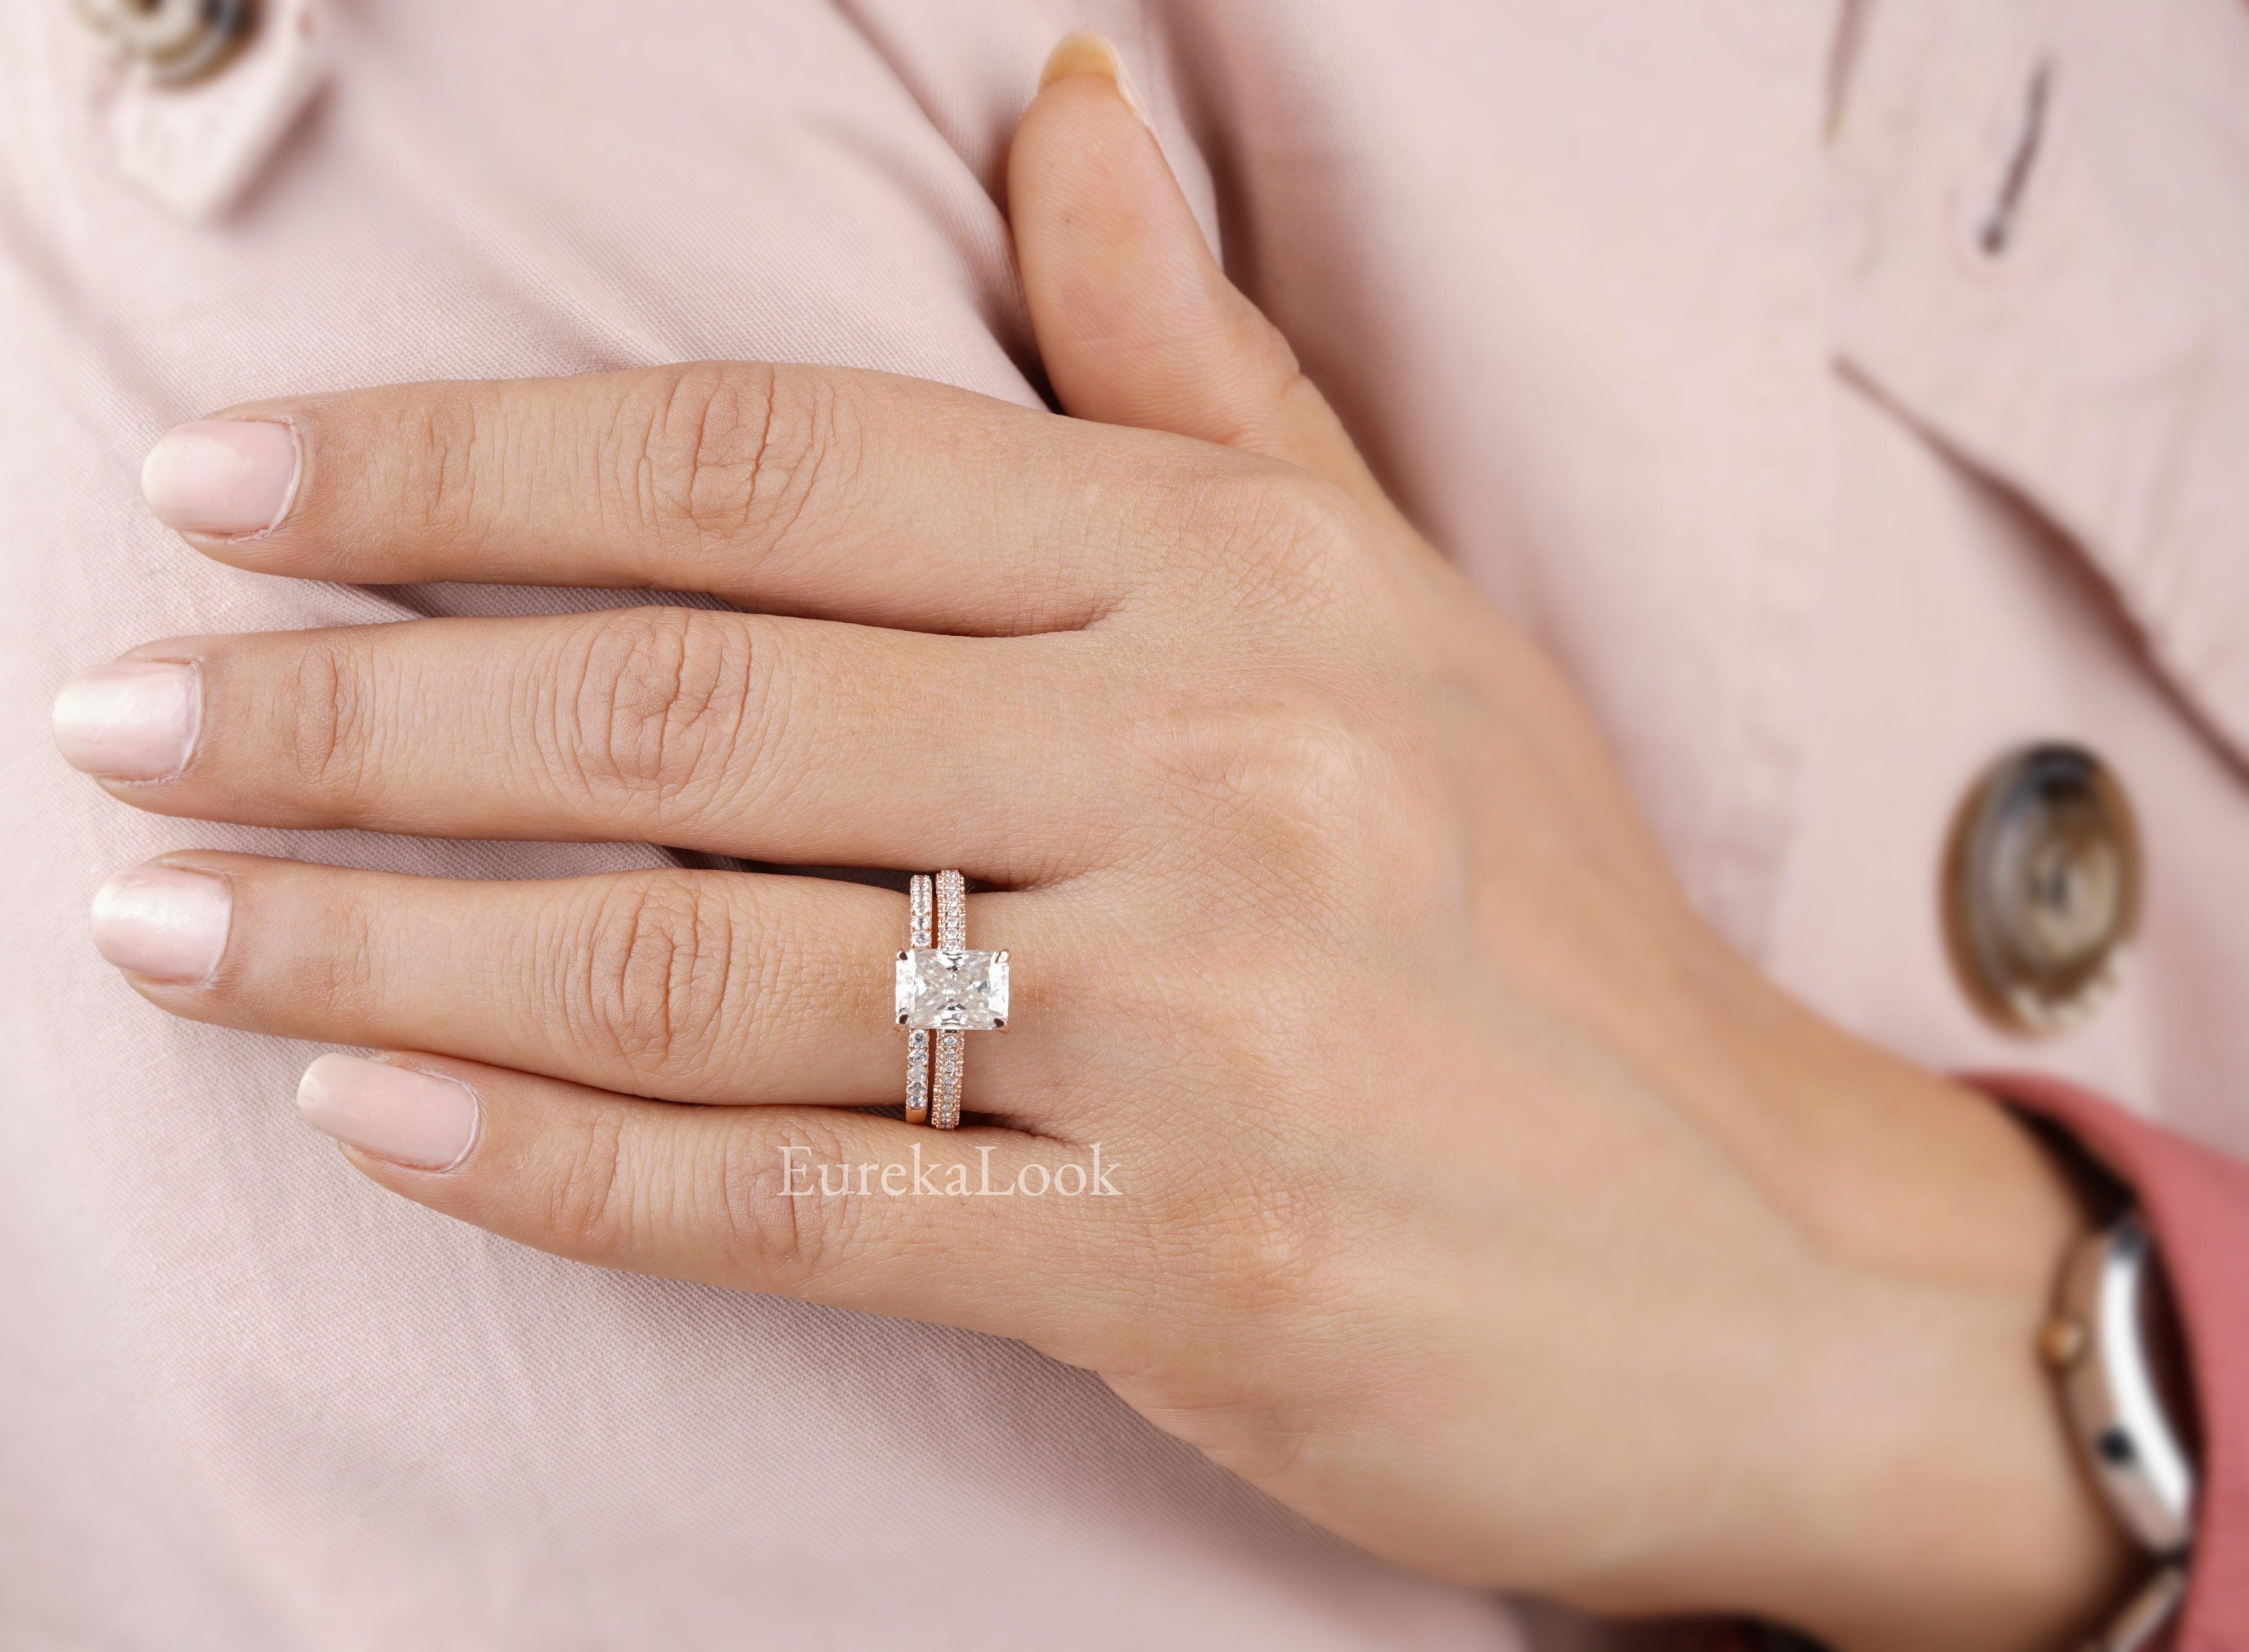 How to keep engagement ring and wedding band from shifting? : r